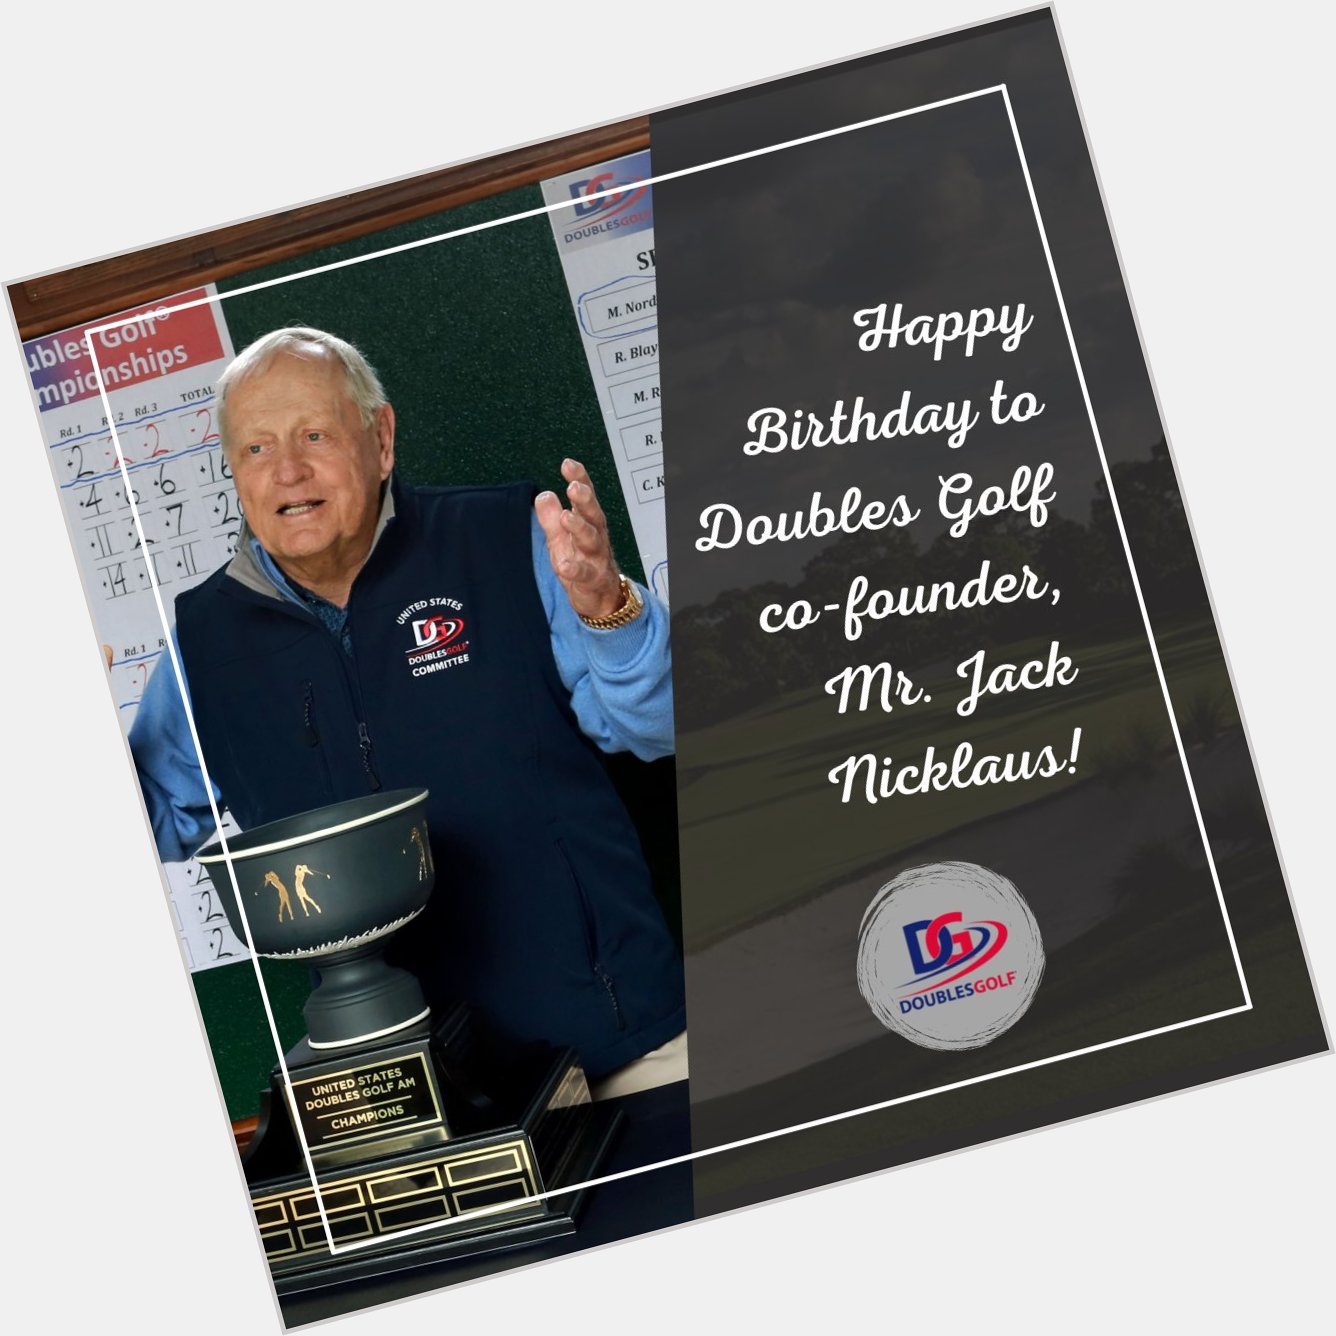 Wishing a Happy Birthday to Mr. Jack Nicklaus 